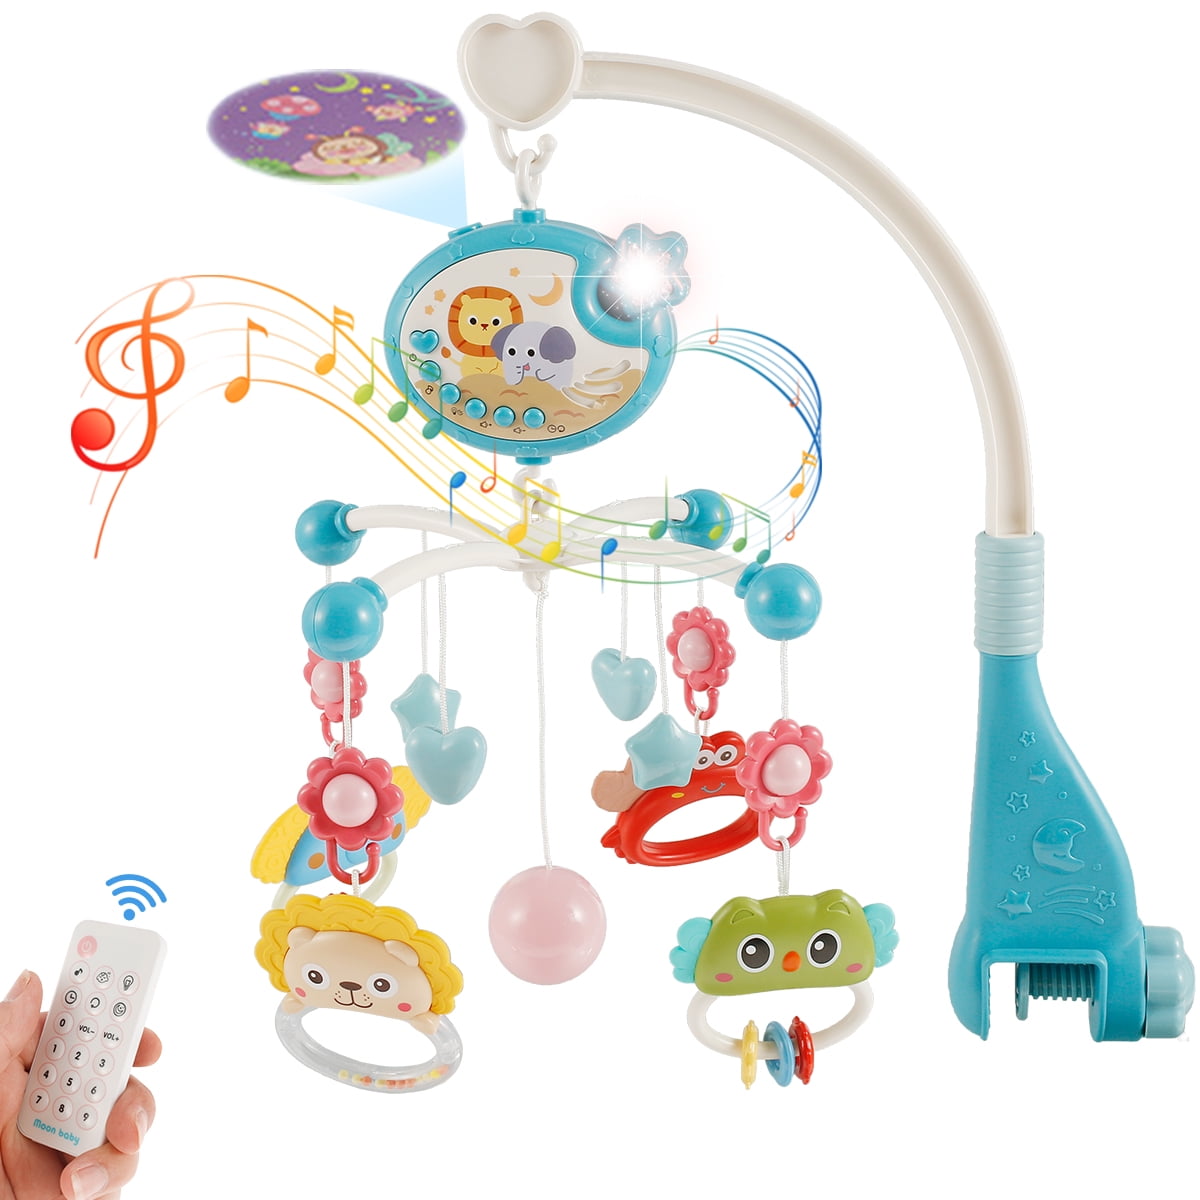 FEBFOXS Baby Crib Mobile with Music and Lights, Mobile for Crib with Remote  Control, Timing Function, Rotation, Hanging Rotating Animals Rattles, Baby